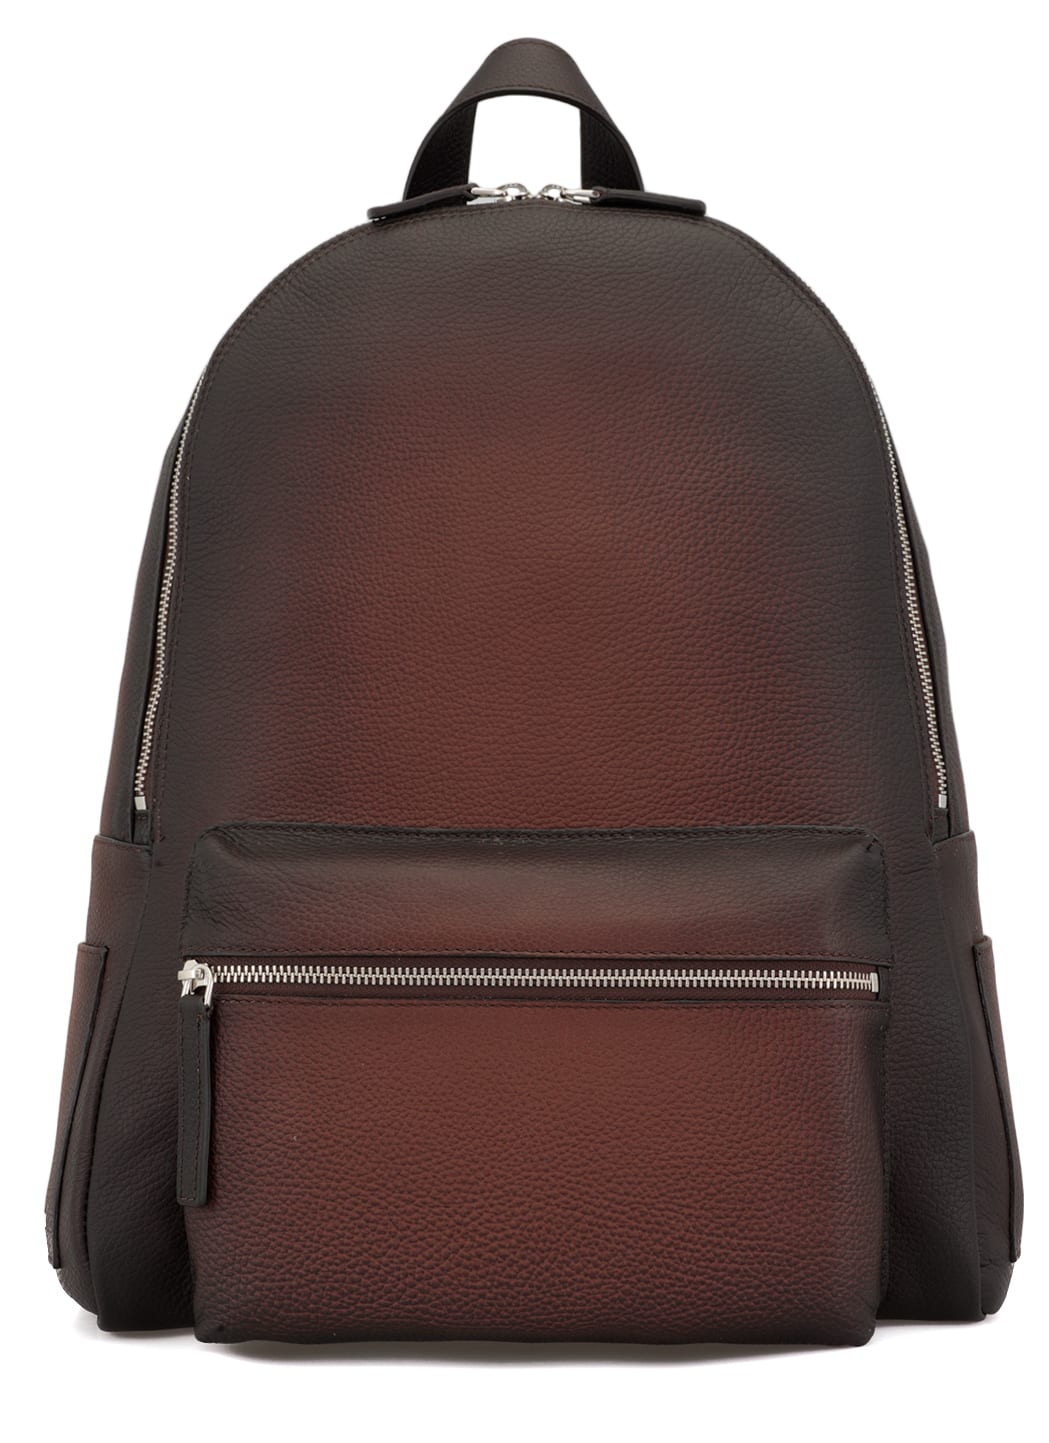 Orciani Micron Deep Leather Backpack